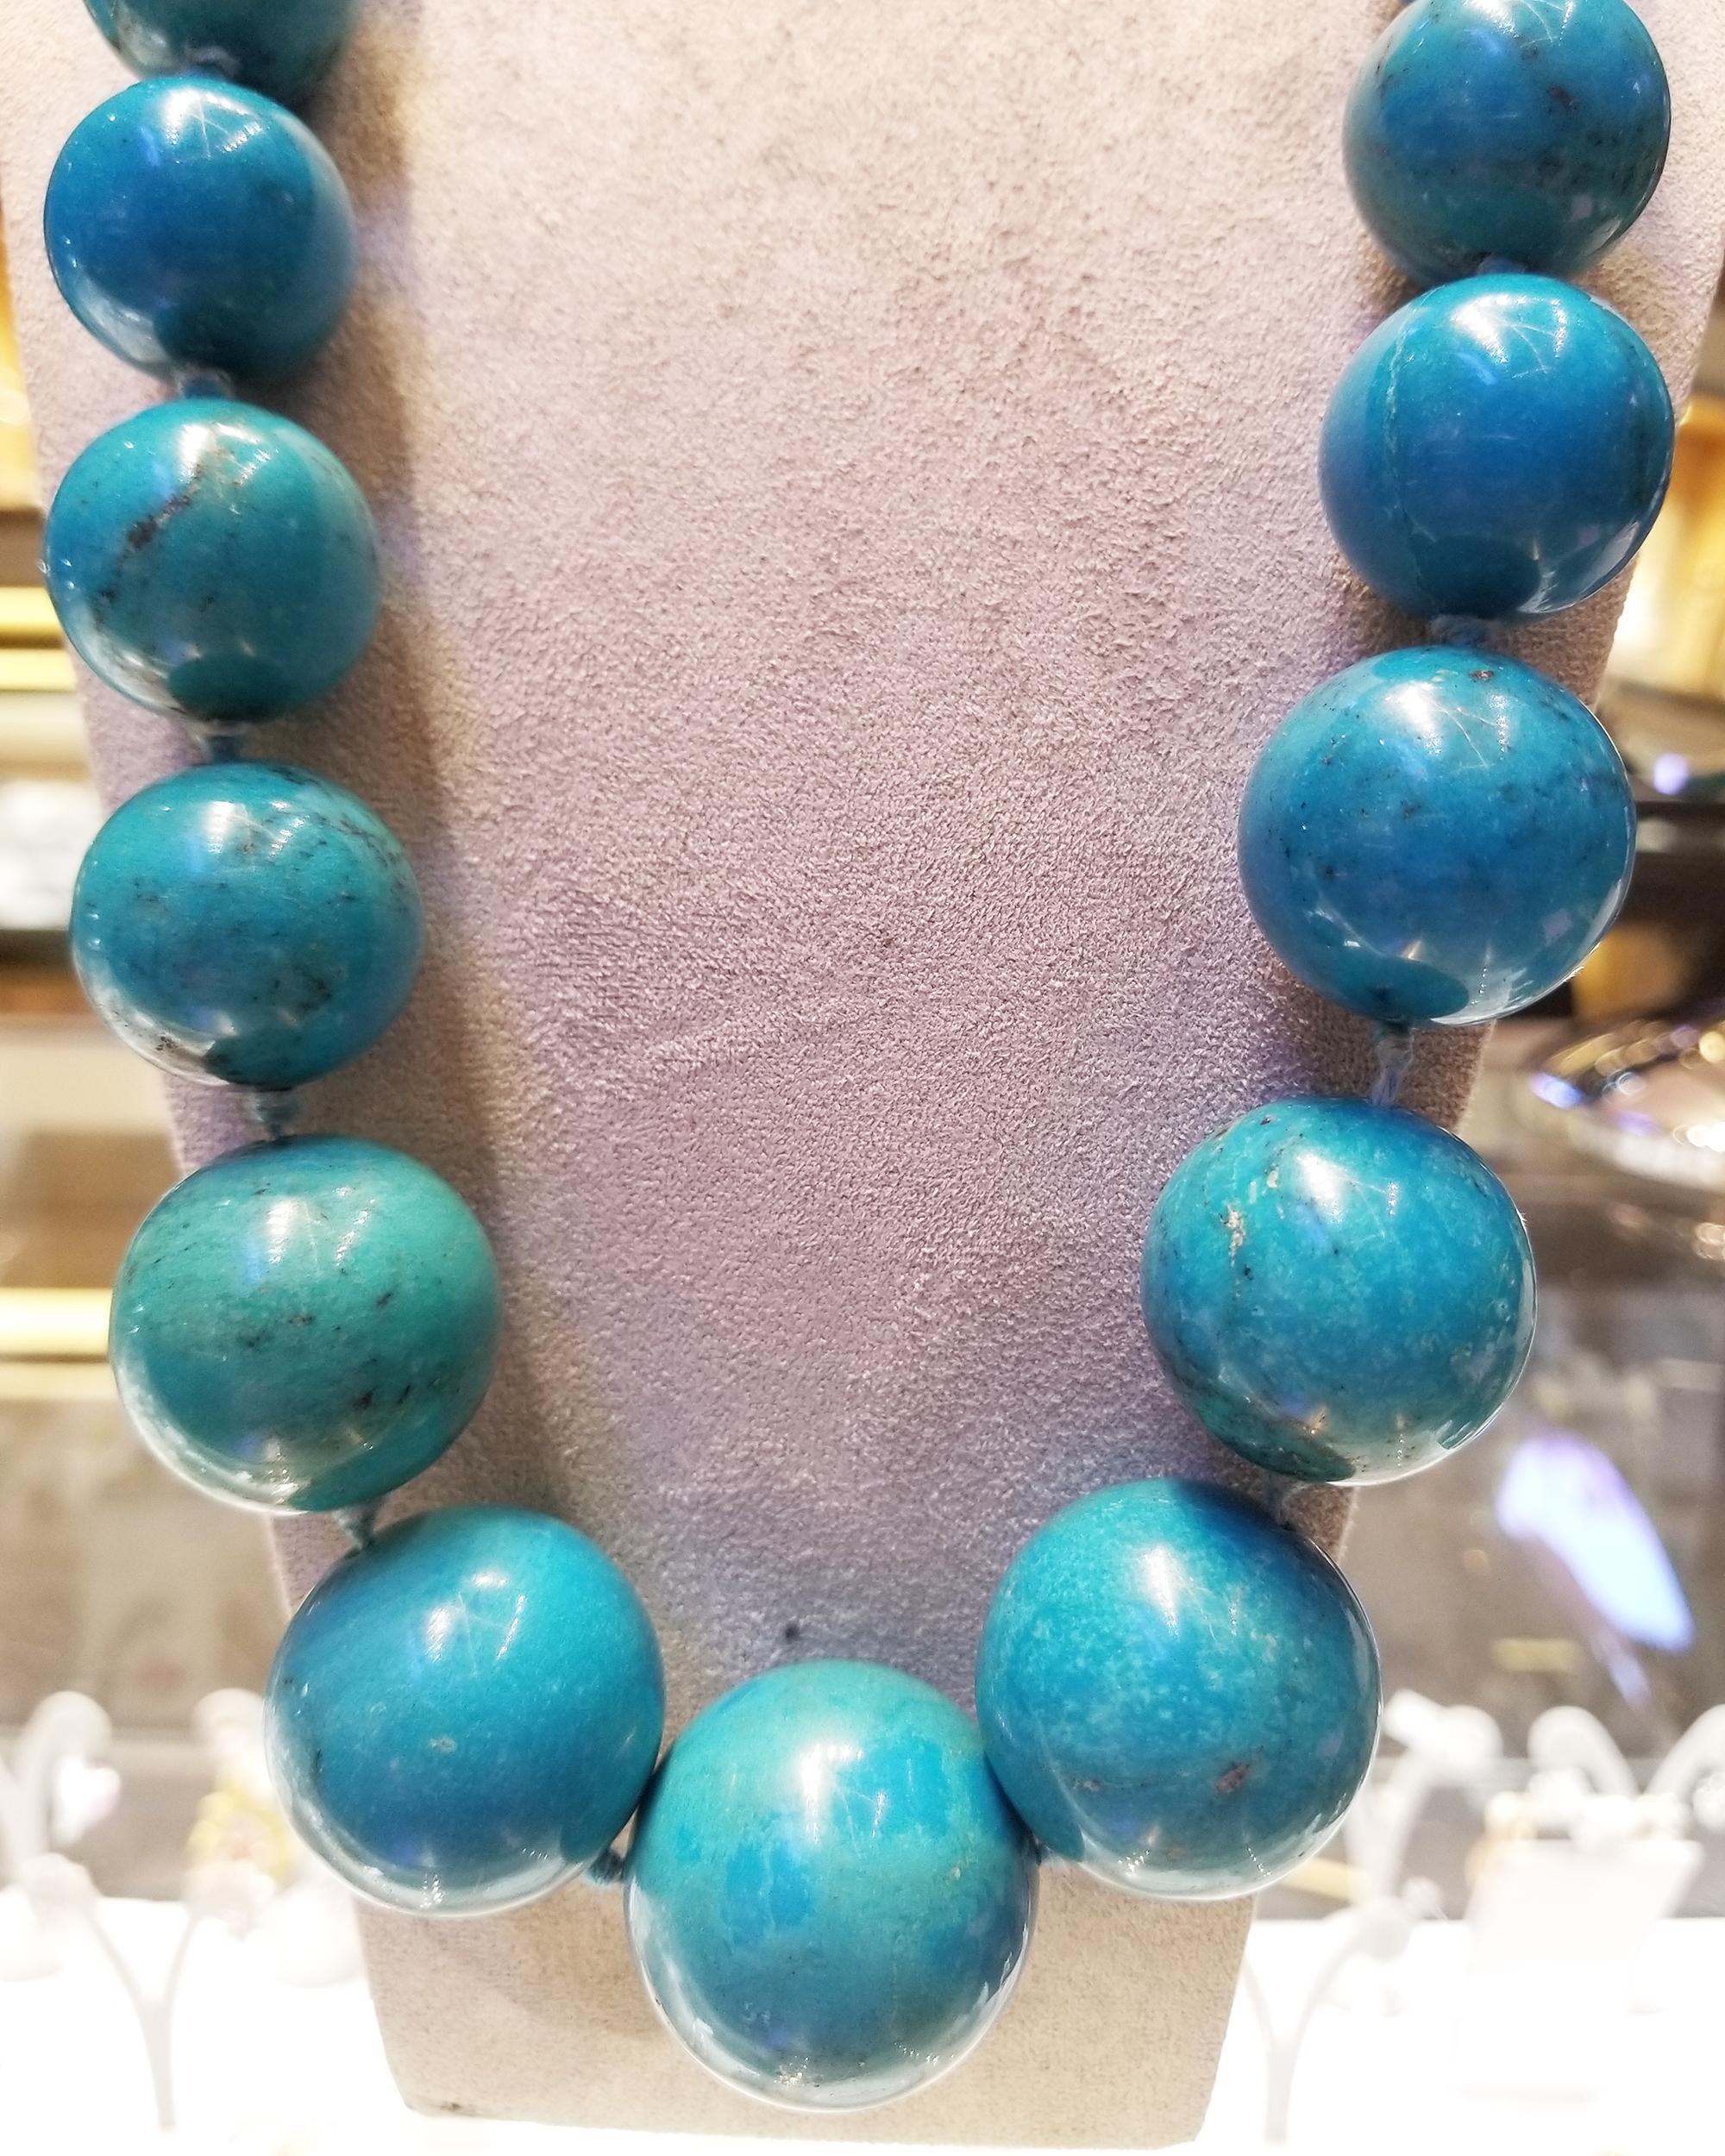 A gorgeous necklace made of natural turquoise. 
358.80 grams of impregnated greenish blue beads in a graduated single strand necklace
with an 18k yellow gold clasp.
Measurements: 25.99 x 25.90 mm to 30.05 x 29.87 mm
Five beads are GIA